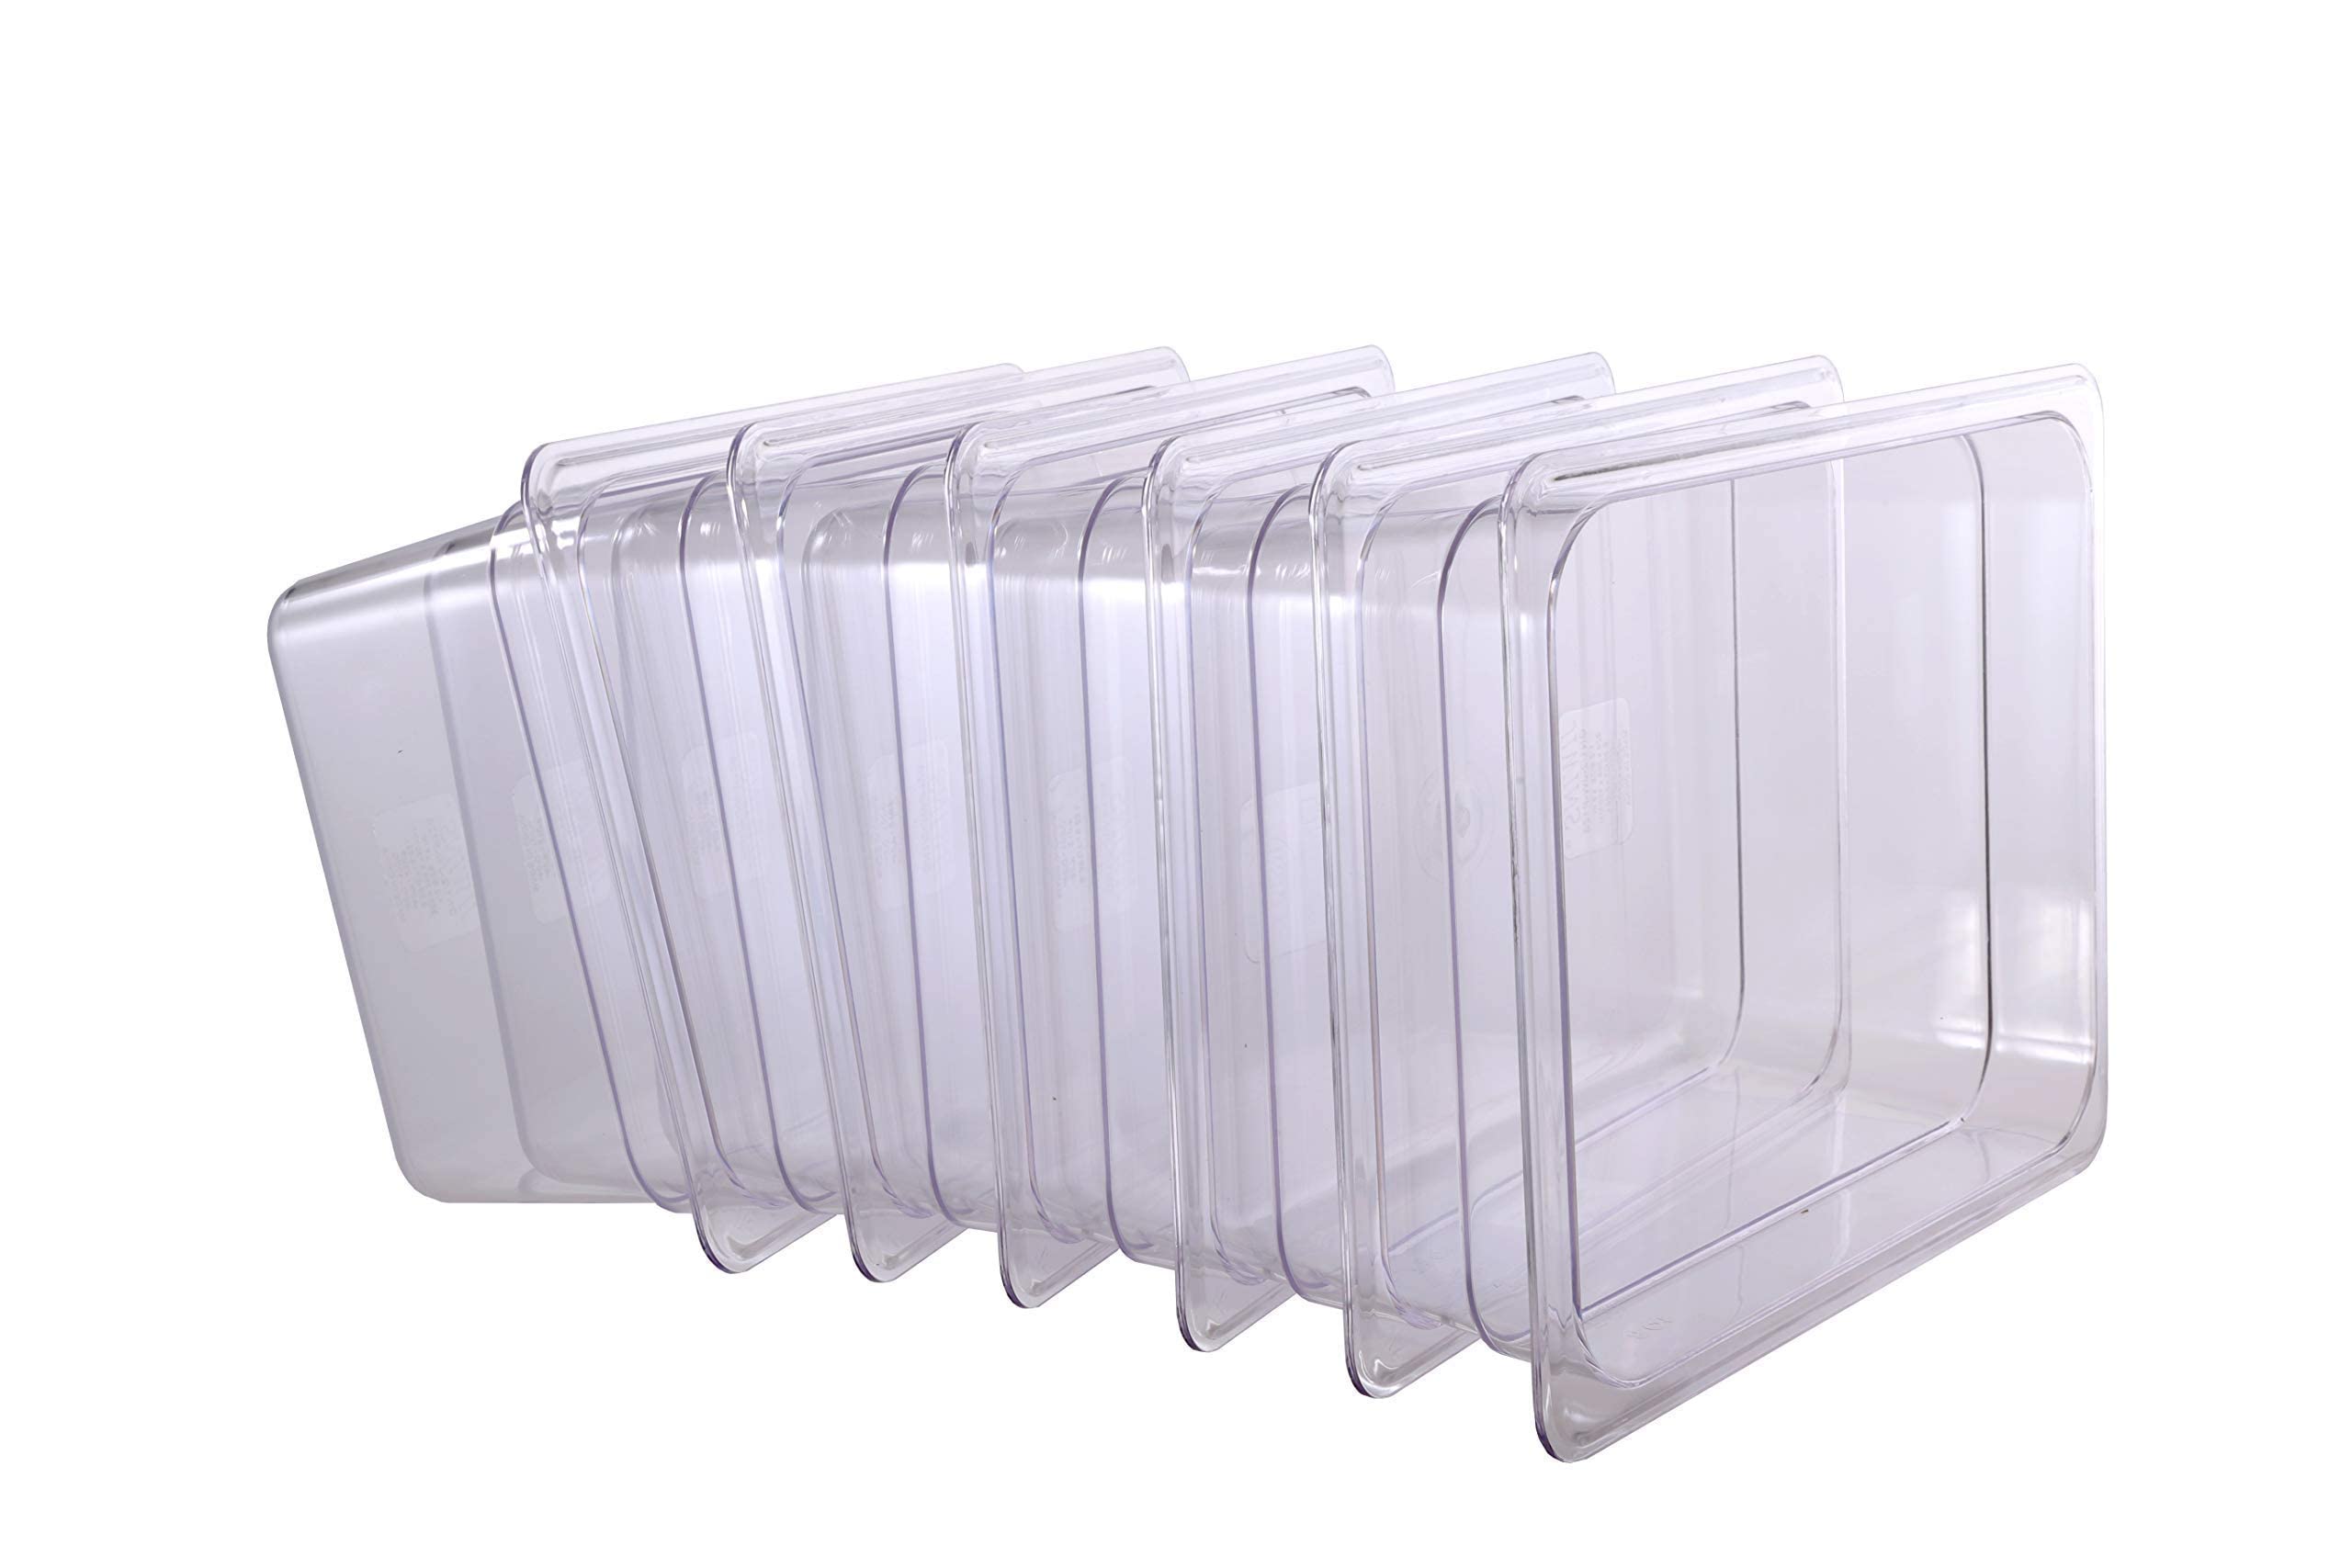 Hakka  6-Pack Food Pan Half Size Clear Polycarbonate Food Pans 1/2 Size 4" Deep Commercial Hotel Pans for Party, Restaurant, Hotel